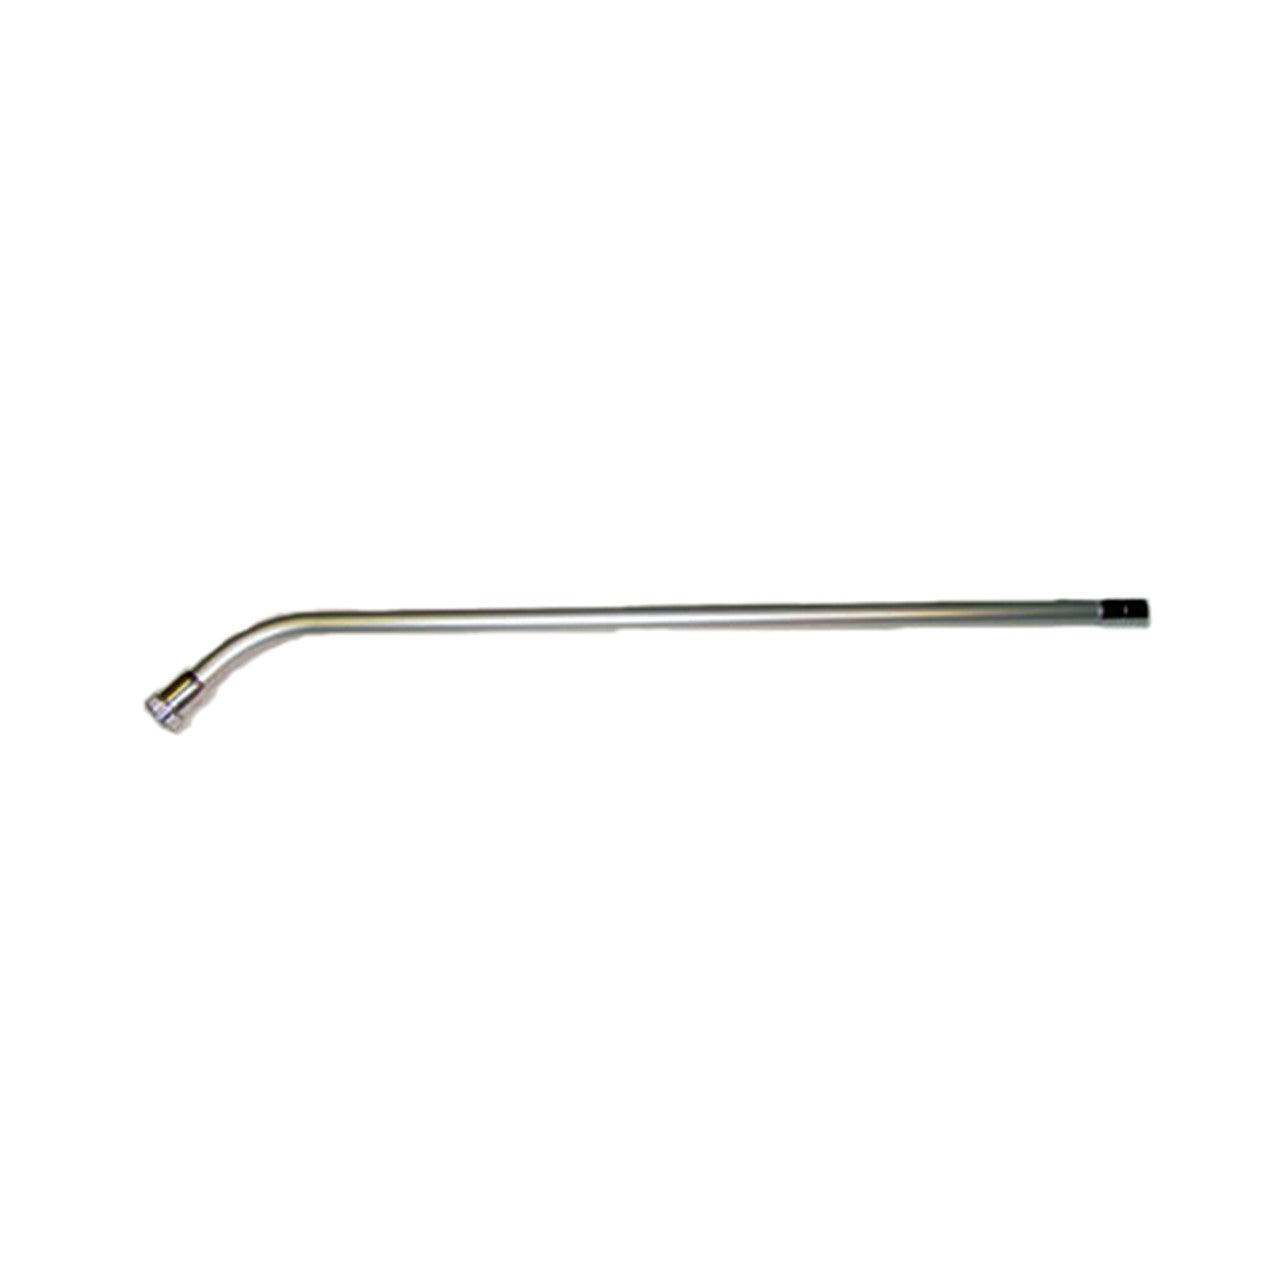 2" x 45" One Bend Chrome Steel Want - Friction Fit